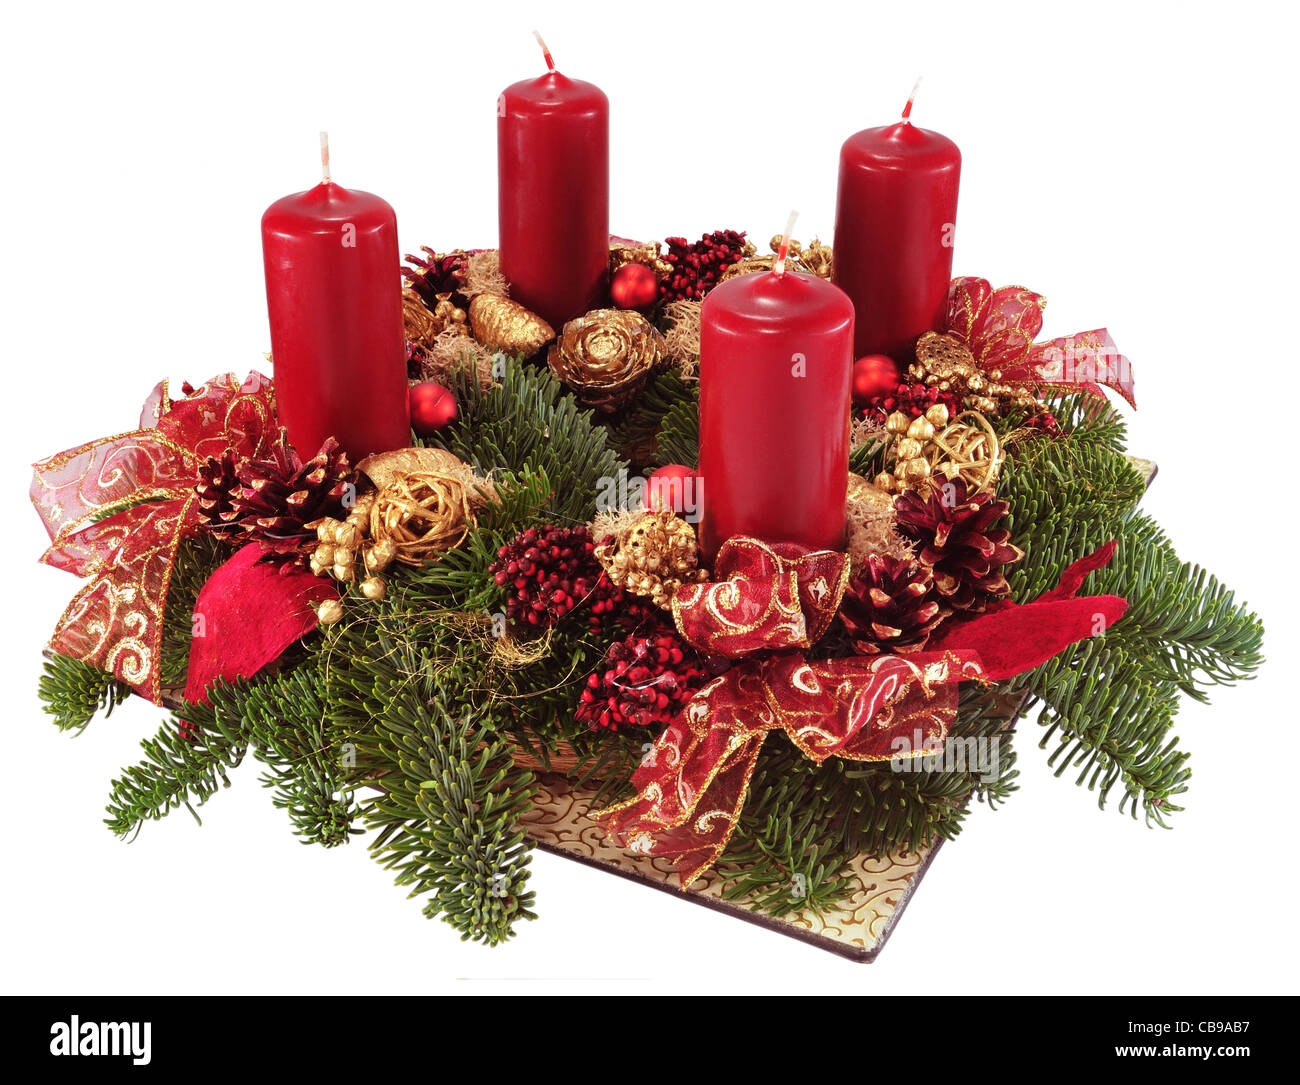 Advent wreath with red candles isolated on white. Stock Photo